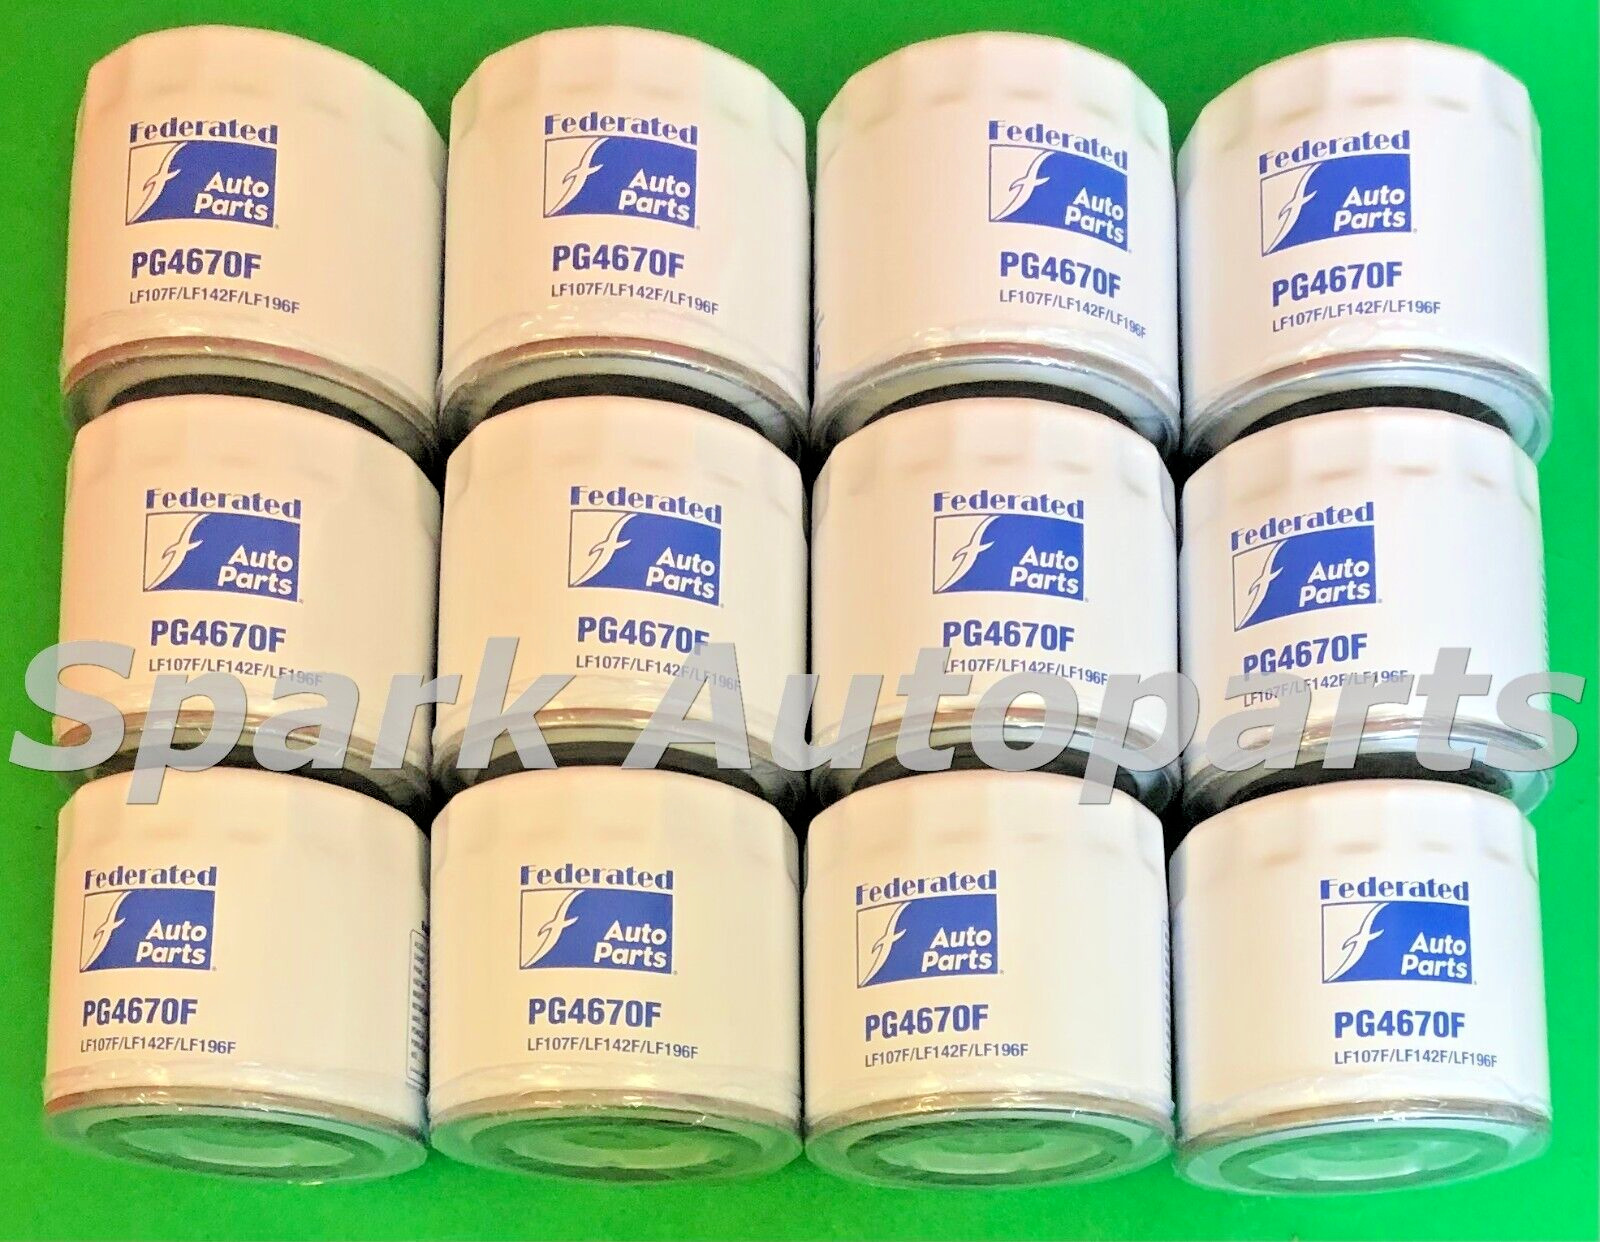 Case of 12 Engine Oil Filter FEDERATED PG4670F For DODGE, CHRYSLER, PLYMOUTH